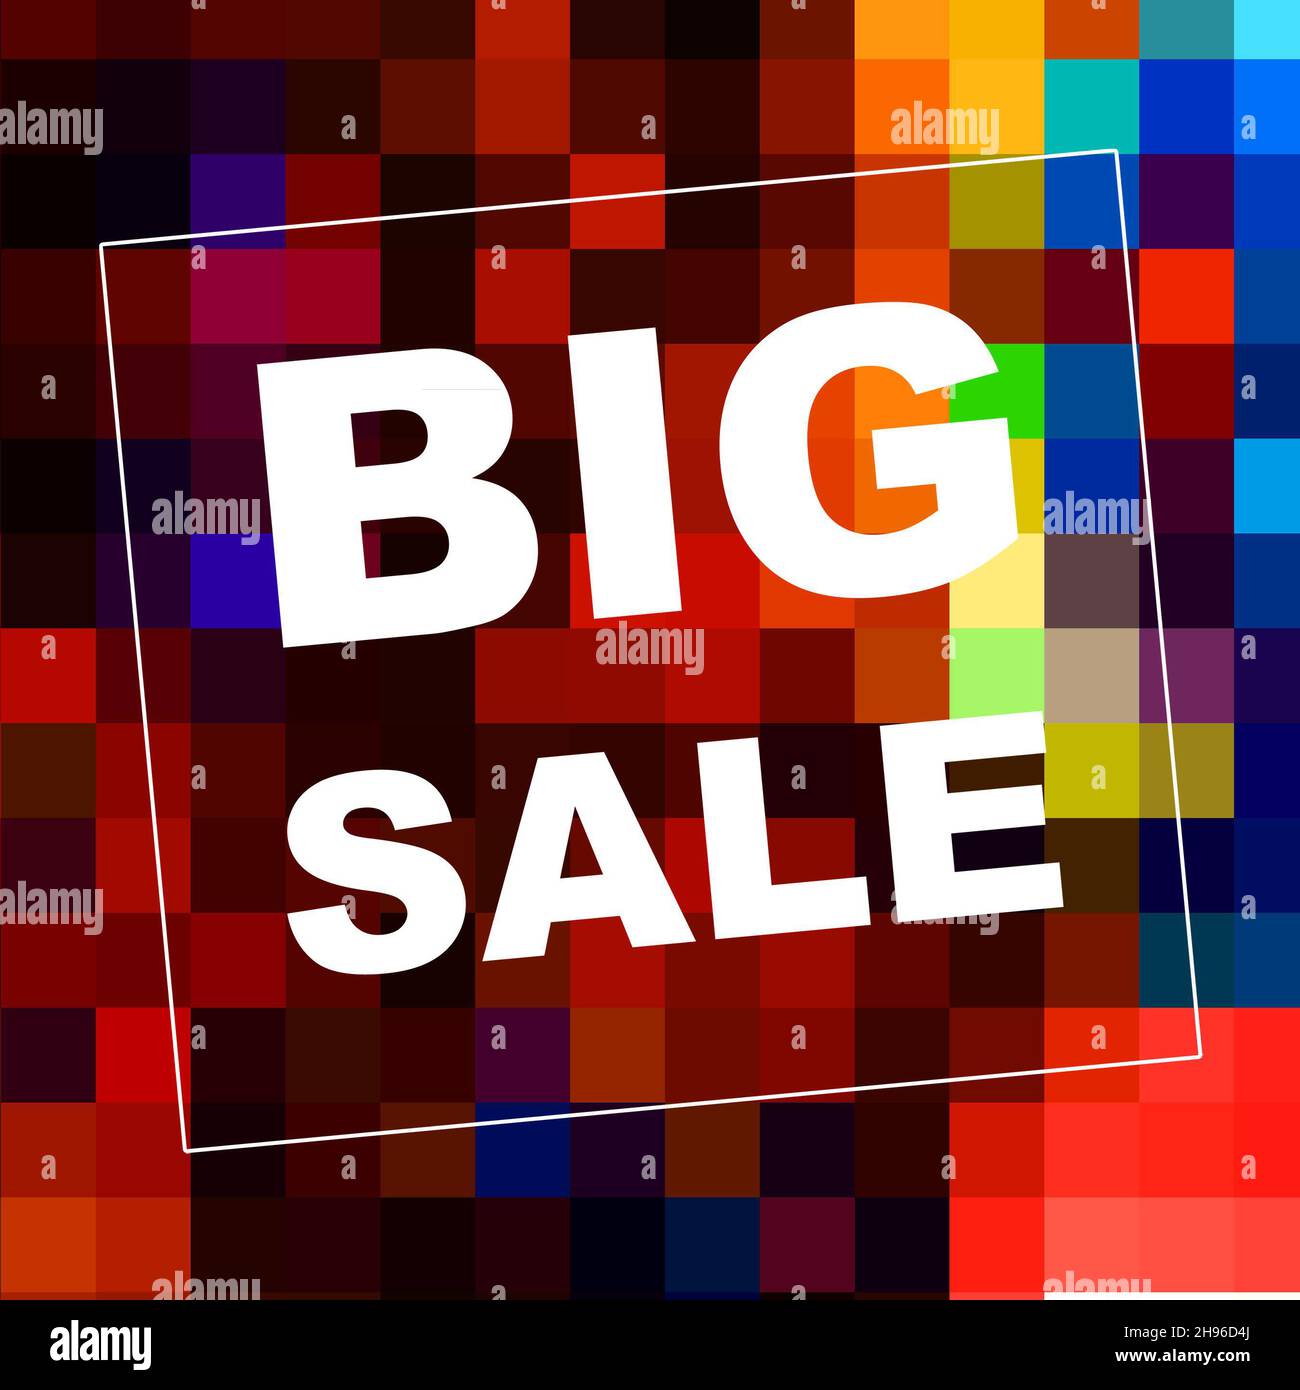 Big sale letters on pixelated background. Discount retail business concept. Black friday concept. Stock Photo